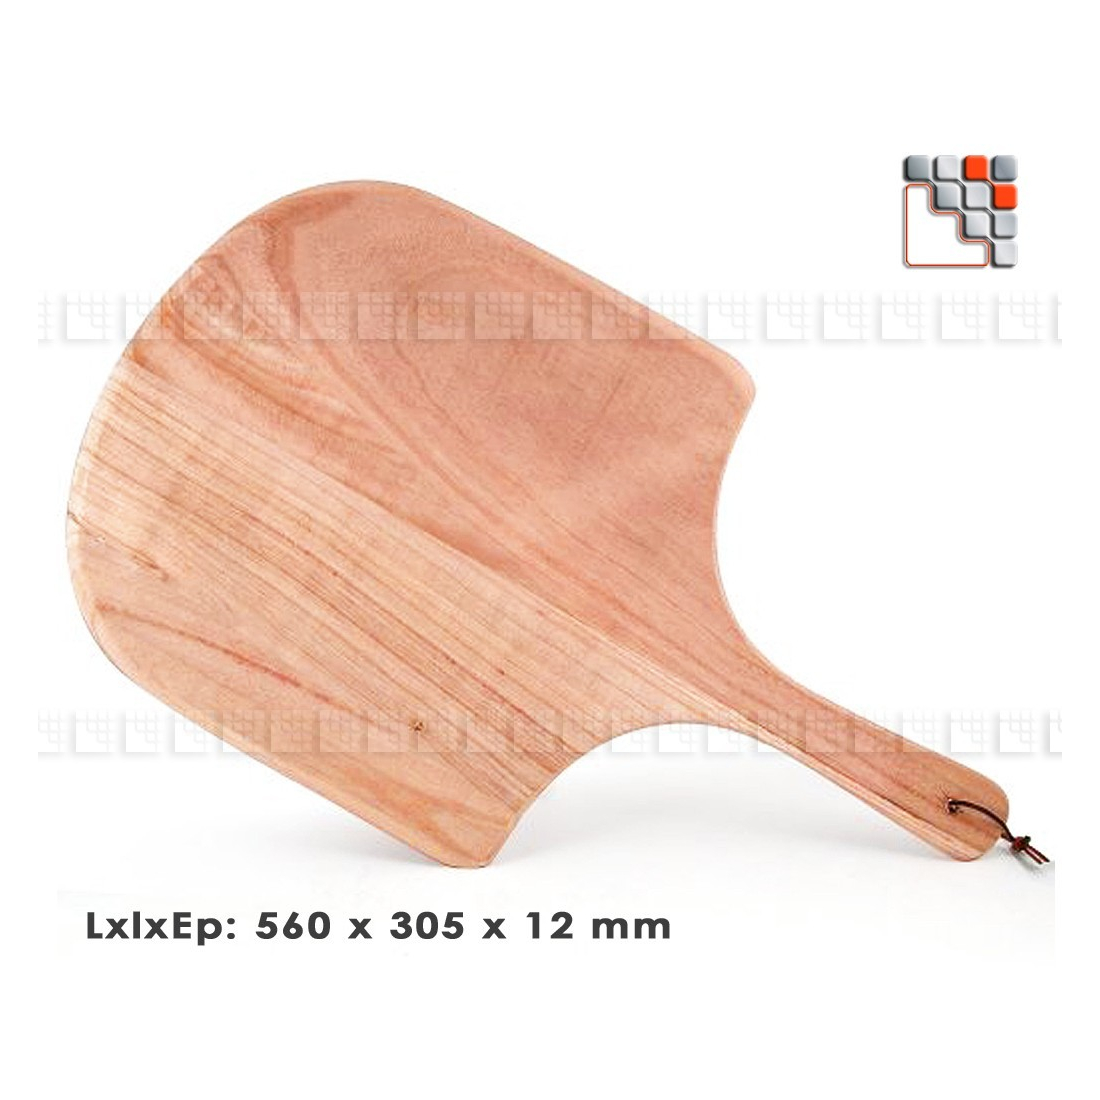 Traditional Beech Wood Pizza Shovel A17-PPEP A la Plancha® Special Pizza Utensils